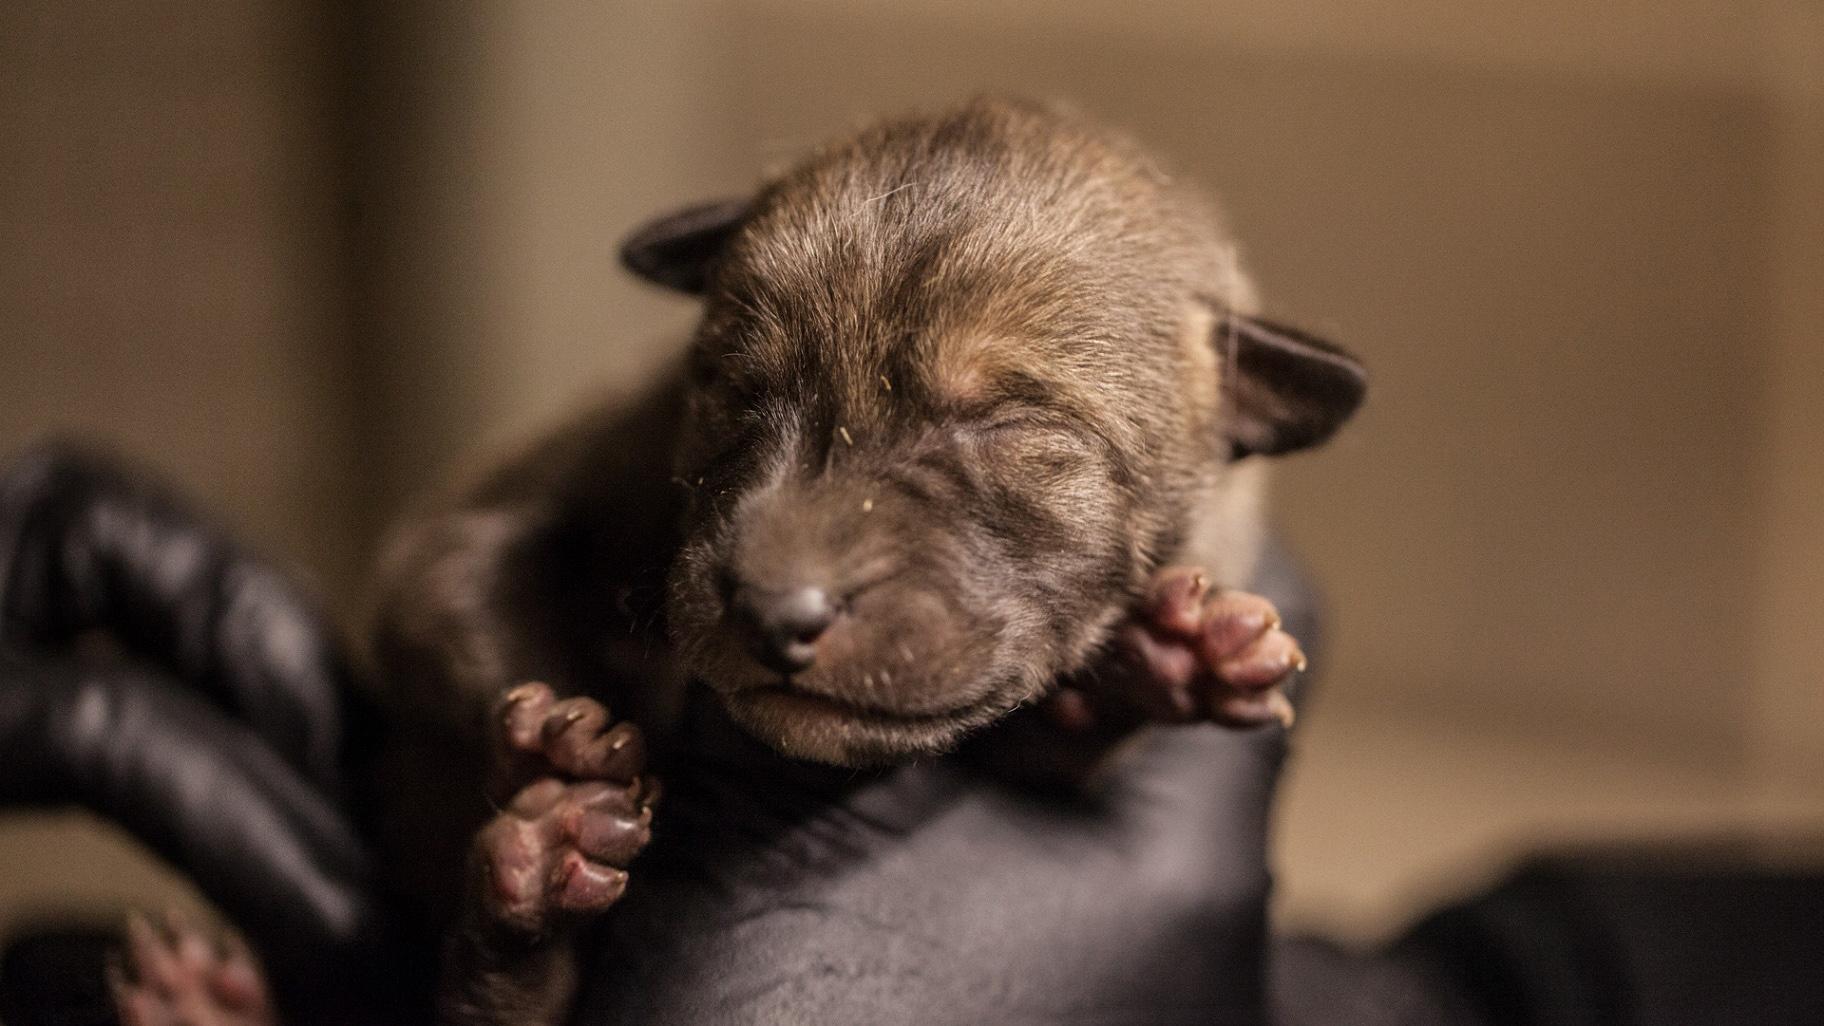 A red wolf pup at Lincoln Park Zoo (Christopher Bijalba / Lincoln Park Zoo)